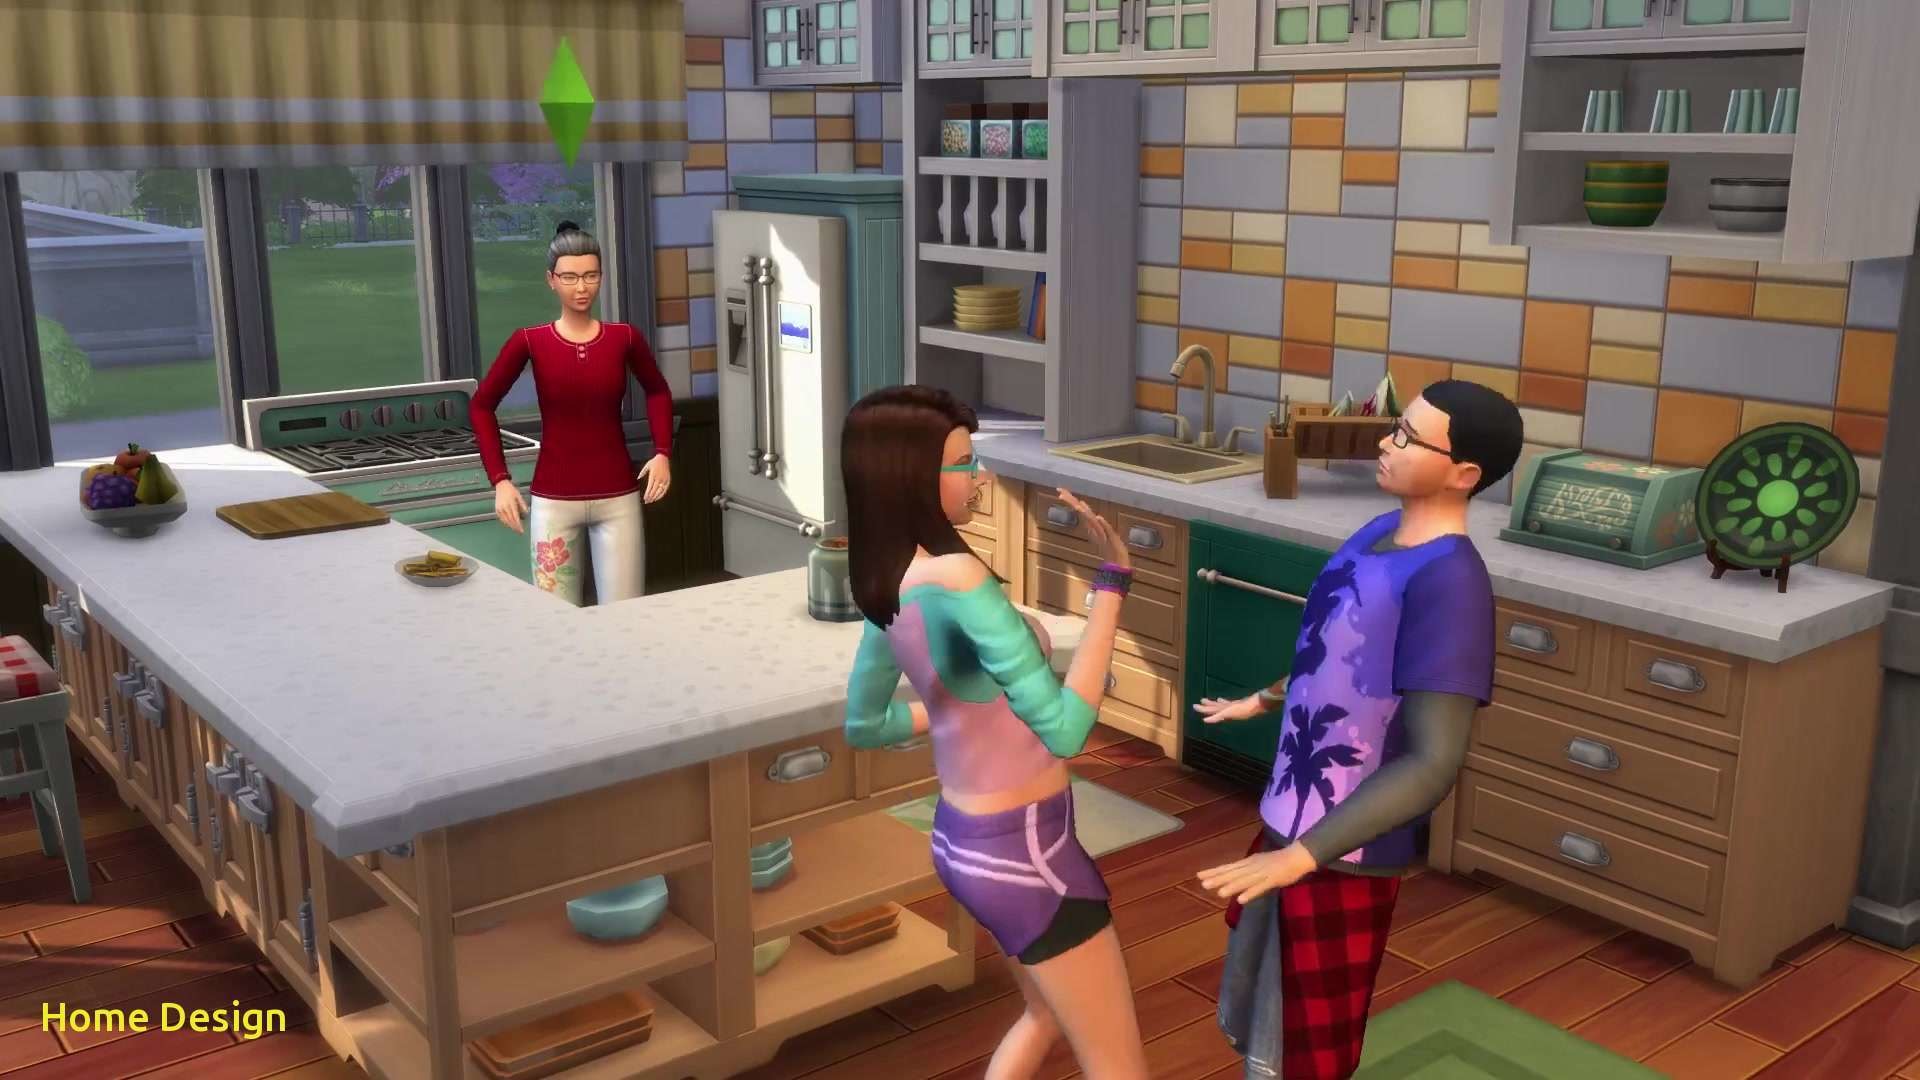 1920x1080 Sims 4 Wallpaper whole Room Lovely the Sims 4 Parenthood Game Pack 100  Trailer Screens